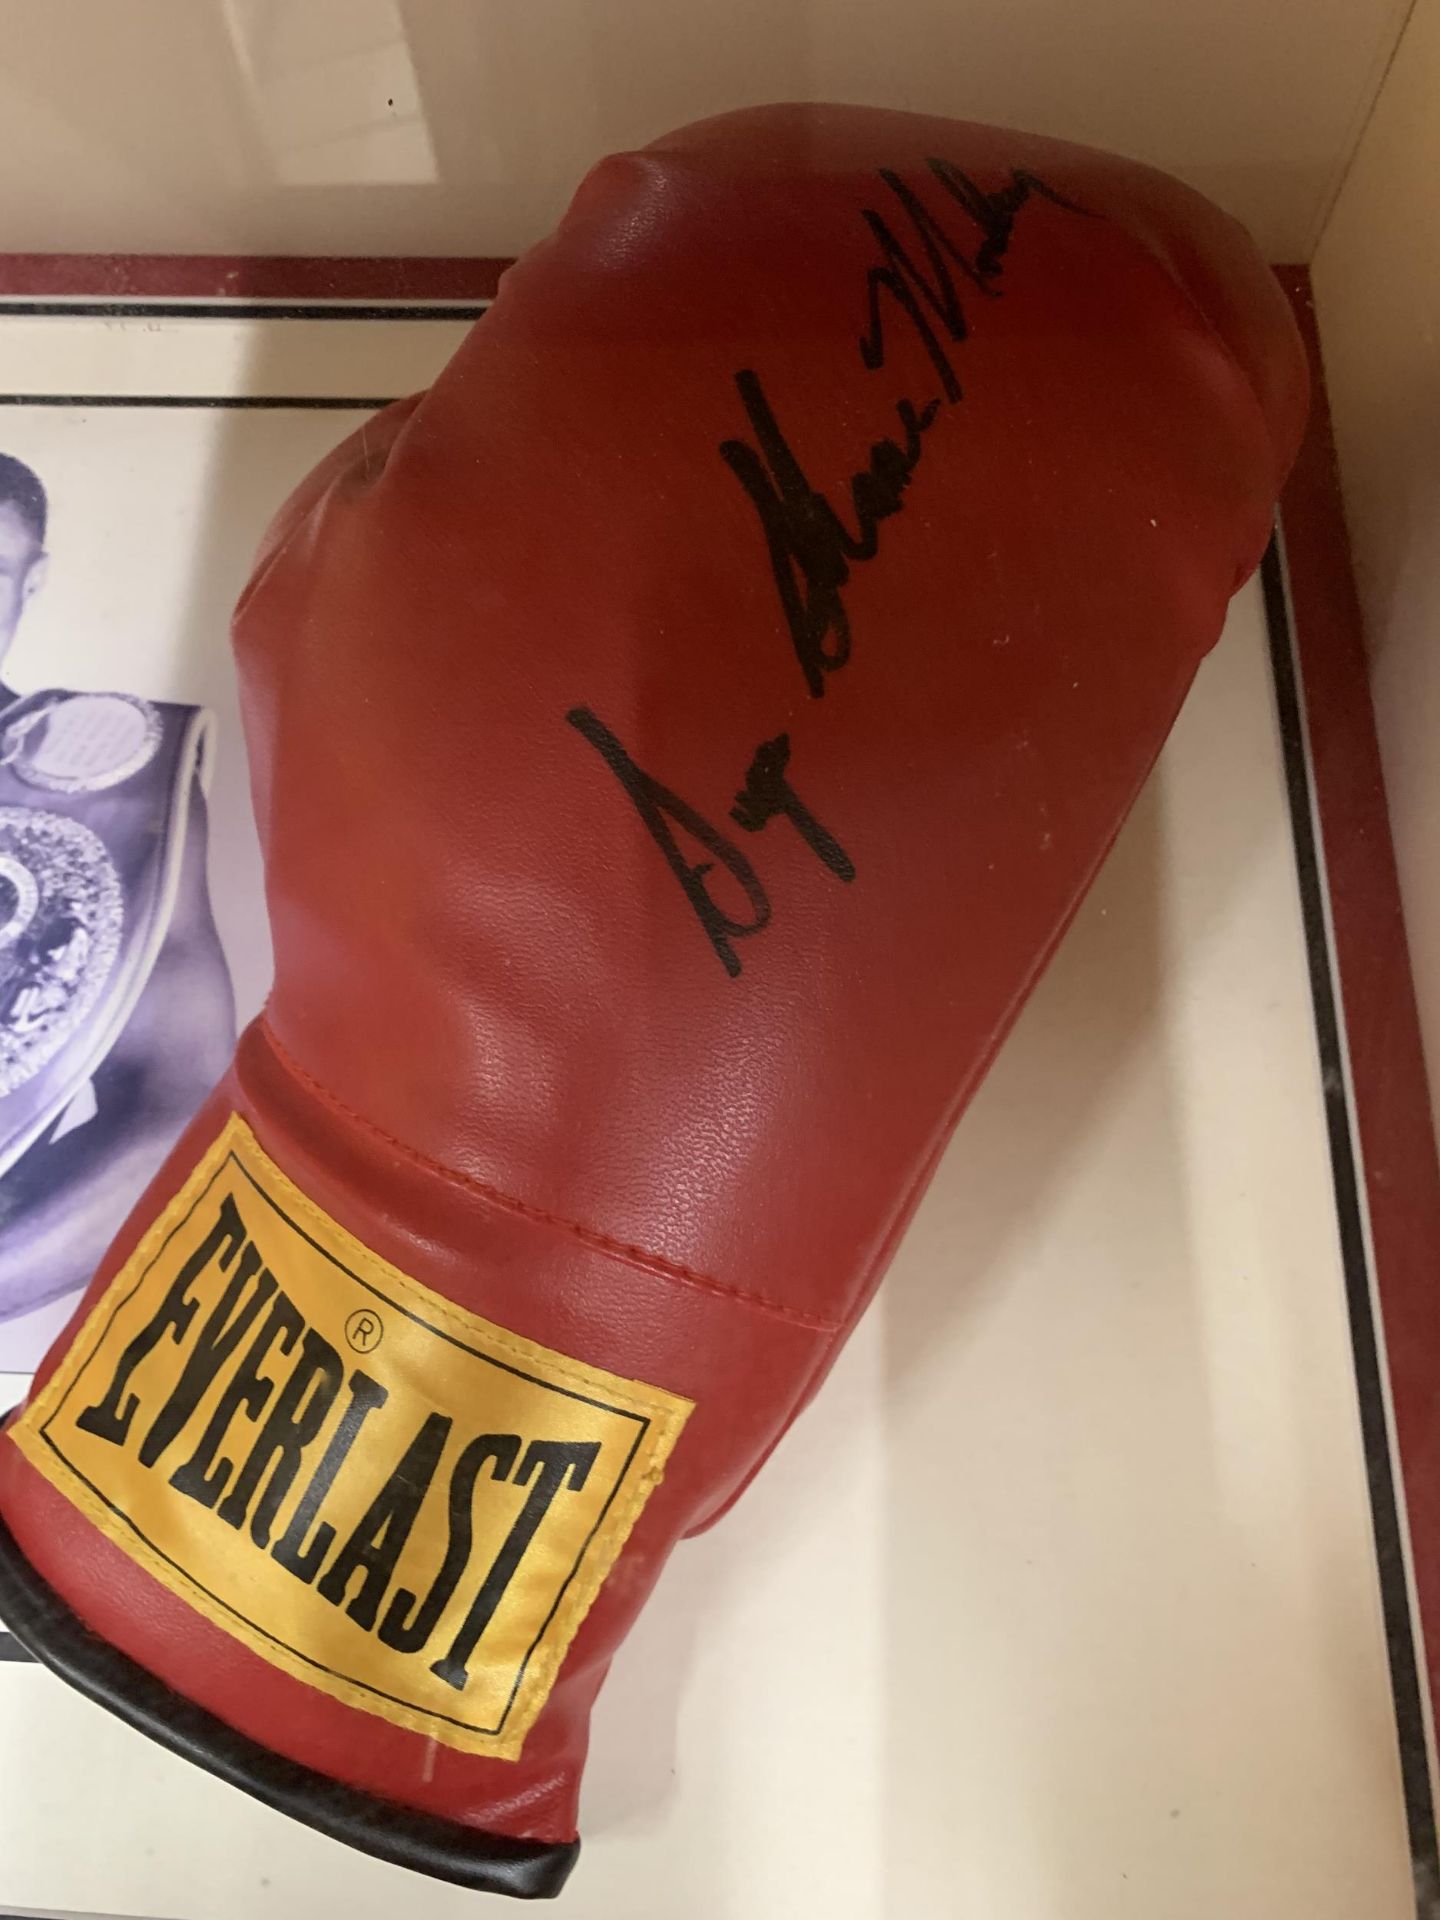 A FRAMED & SIGNED SUGAR SHANE MOSLEY BOXING GLOVE & PHOTOGRAPH - Image 3 of 5